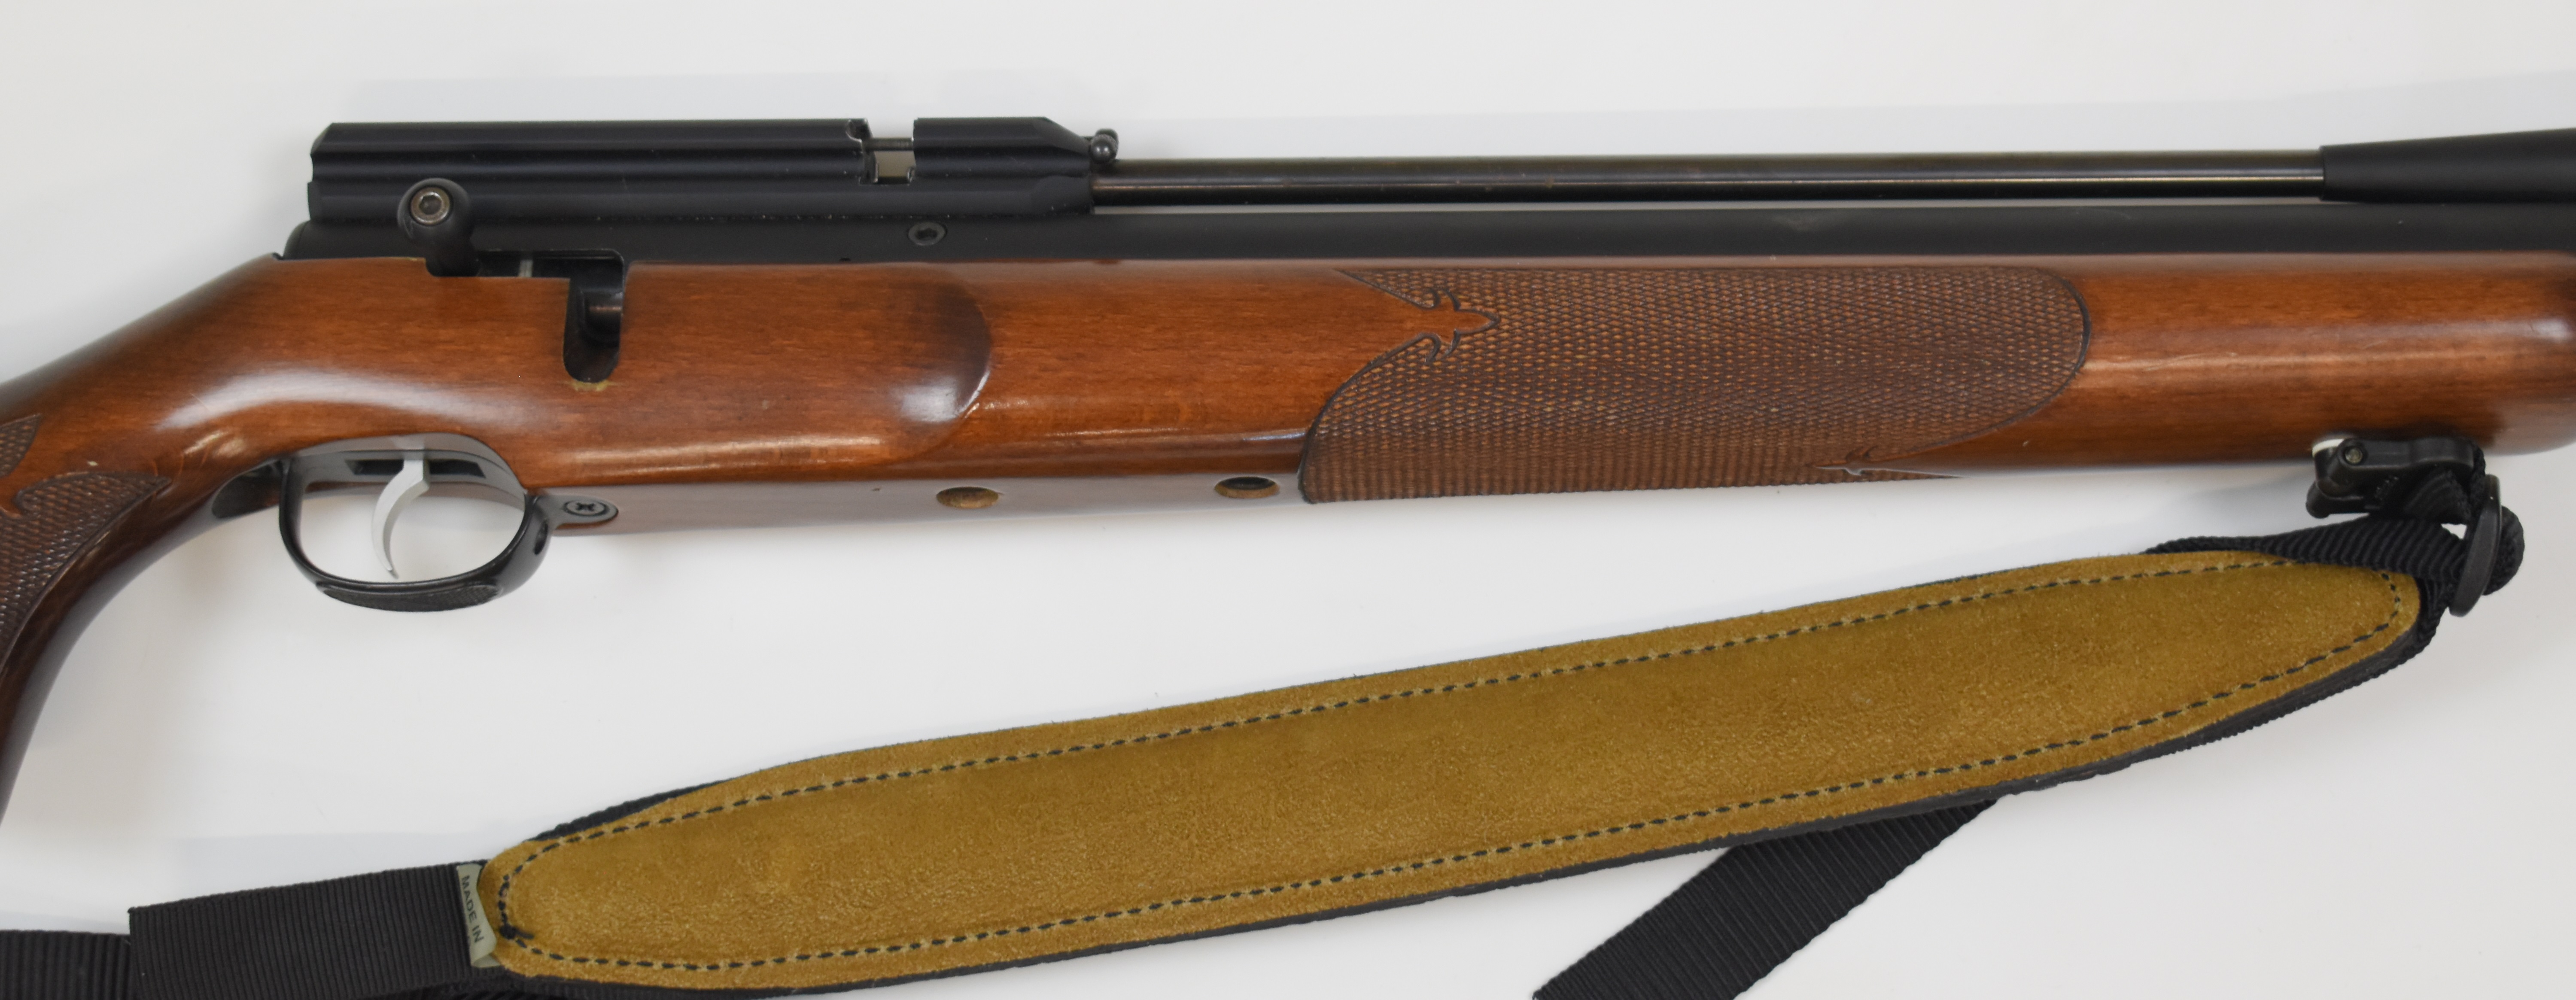 Webley Axsor .22 PCP air rifle with chequered semi-pistol grip and forend, raised cheek piece, - Image 4 of 10